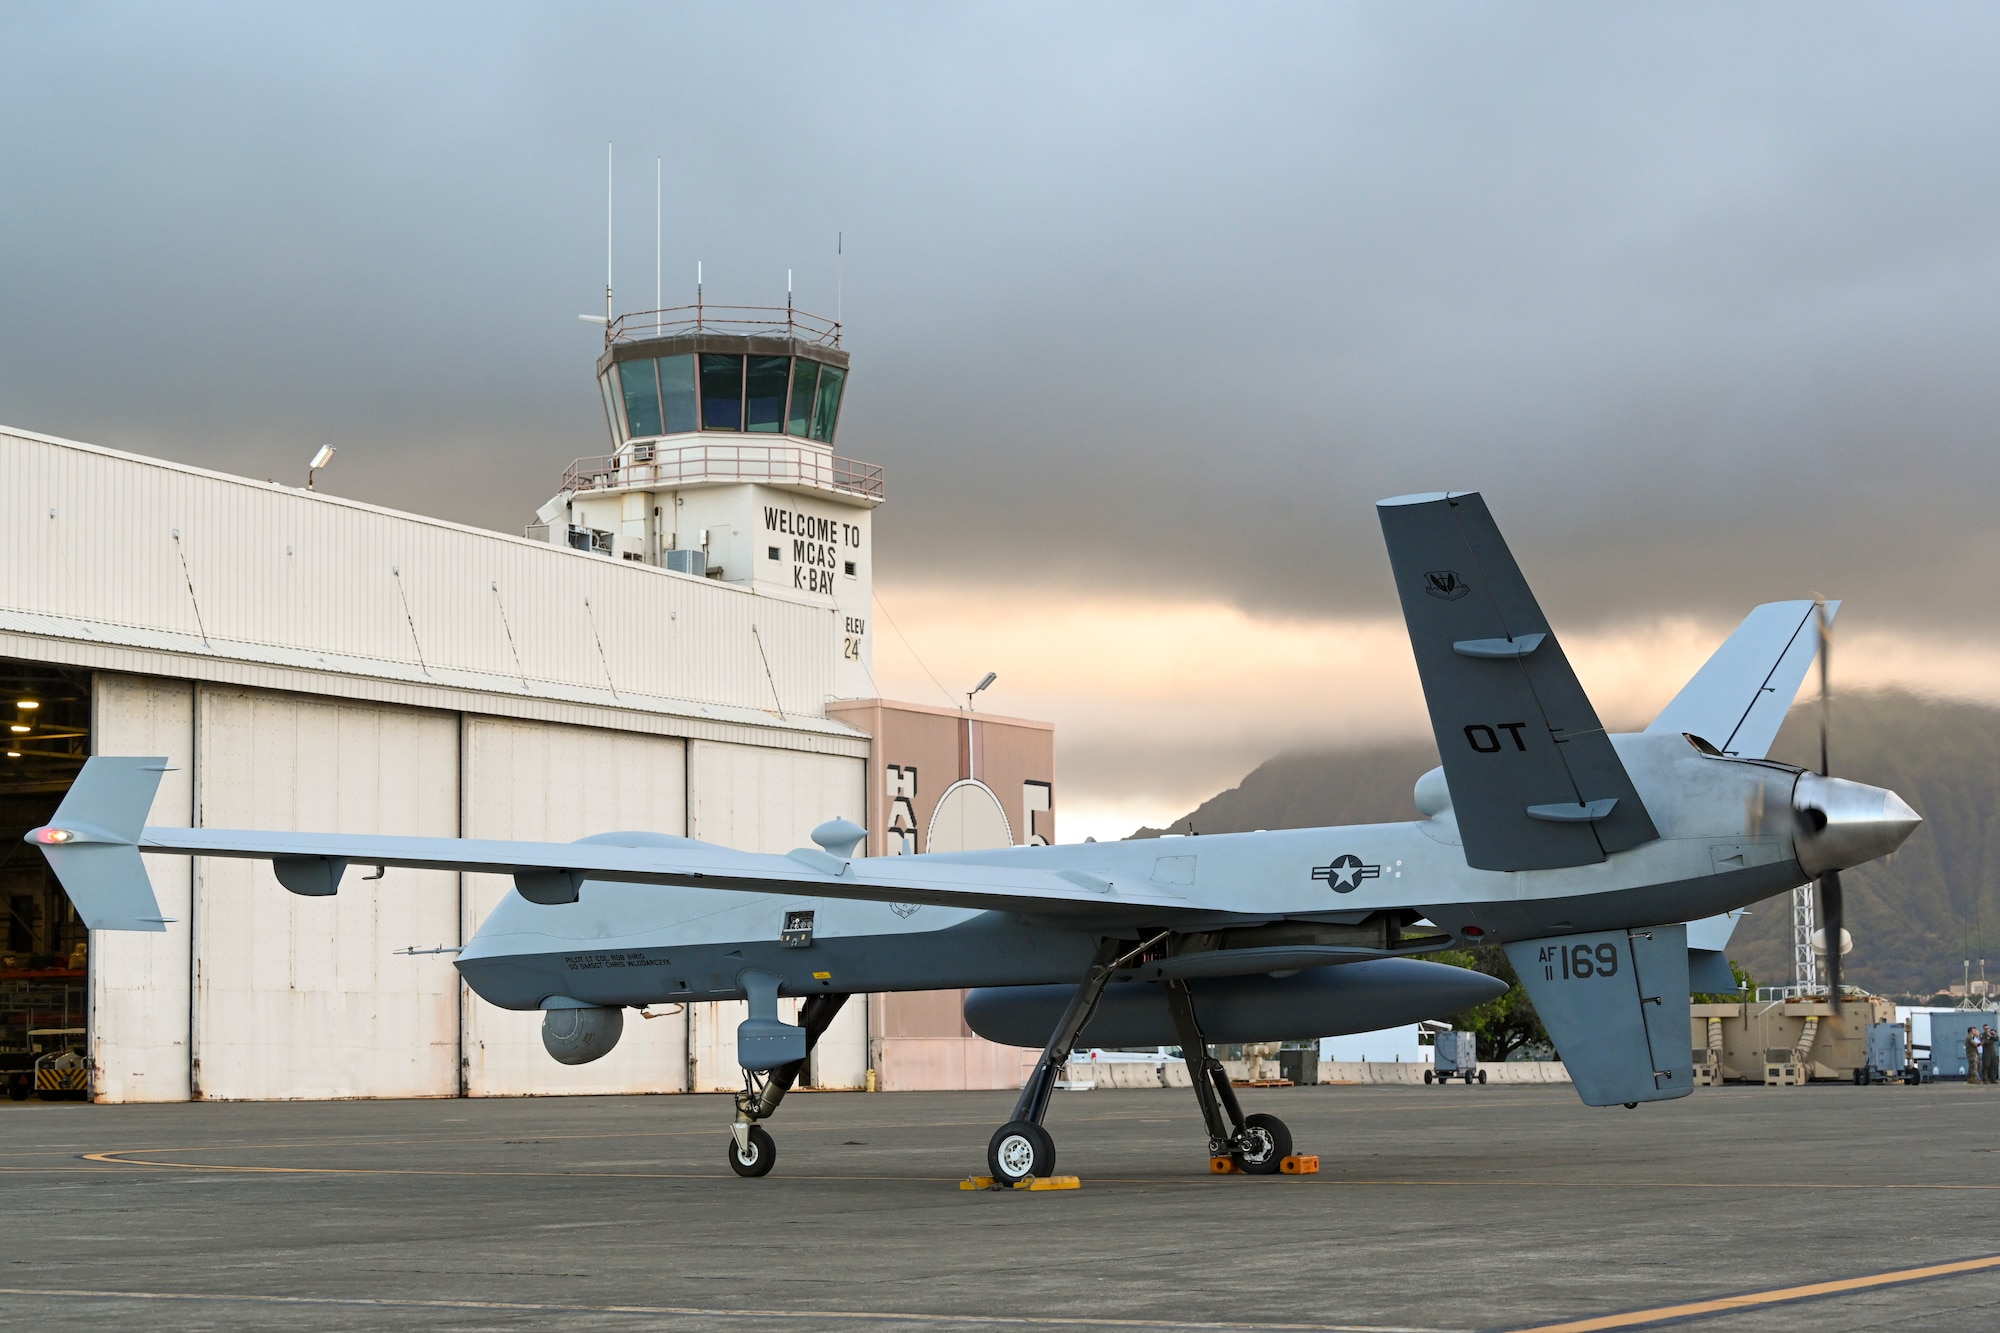 An MQ-9 Reaper from Creech Air Force Base, Nevada, sits on the flightline during Exercise Agile Combat Employment Reaper Sept. 13, 2021, on Marine Corps Base Hawaii. Agile combat employment leverages interoperability between the joint forces to maintain the strategic initiative, present lethal credible combat power with operational unpredictability and ultimately win. (U.S. Air Force Photo by Airman 1st Class Adrian Salazar)